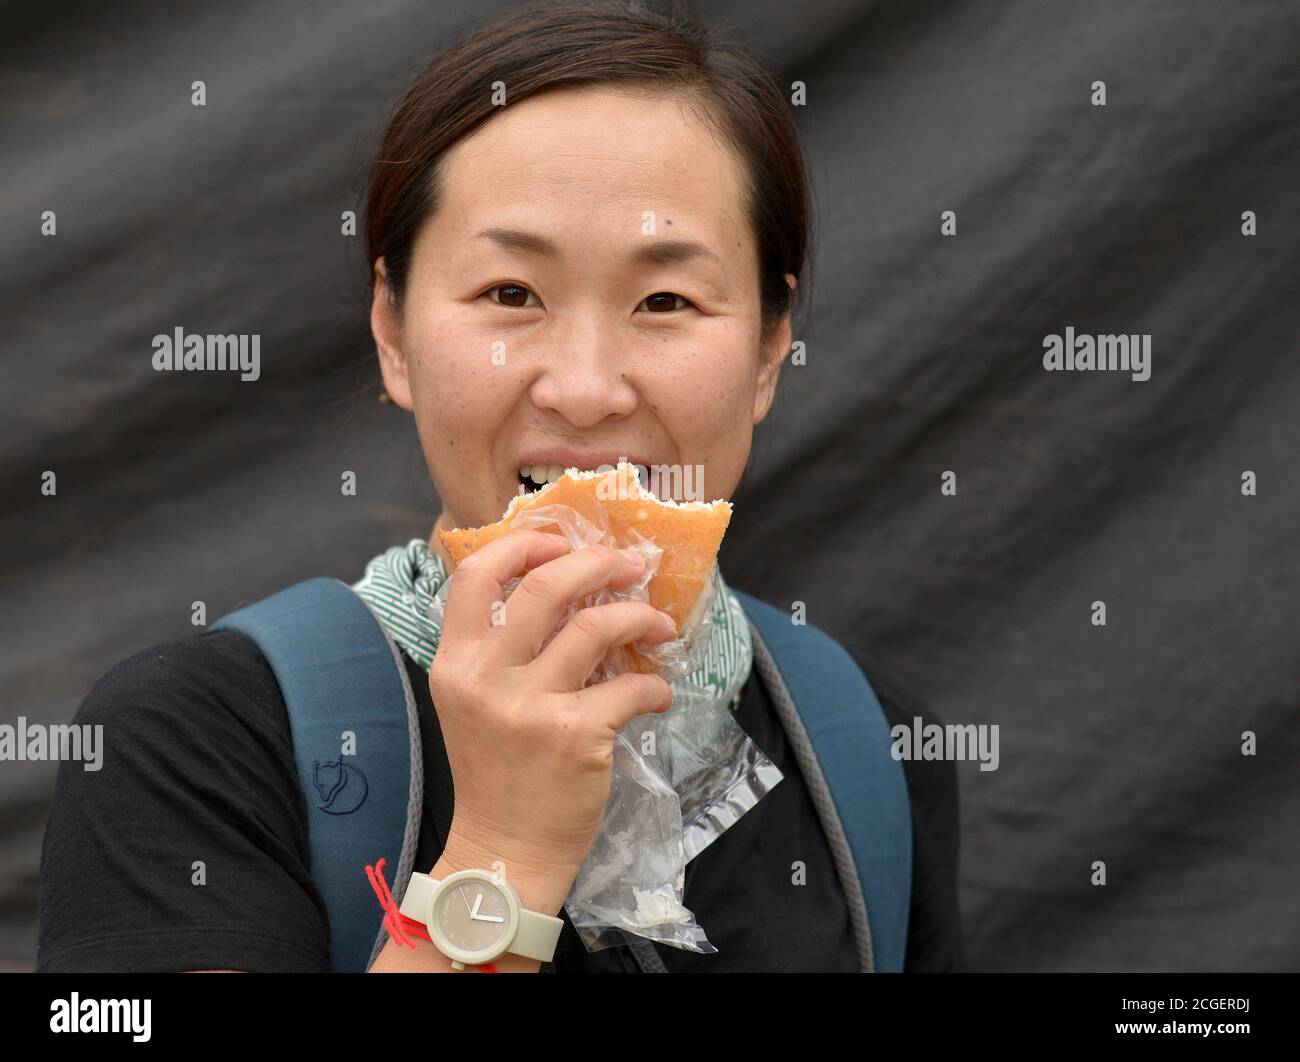 Female Japanese tourist eats a bread roll and looks at the camera. Stock Photo